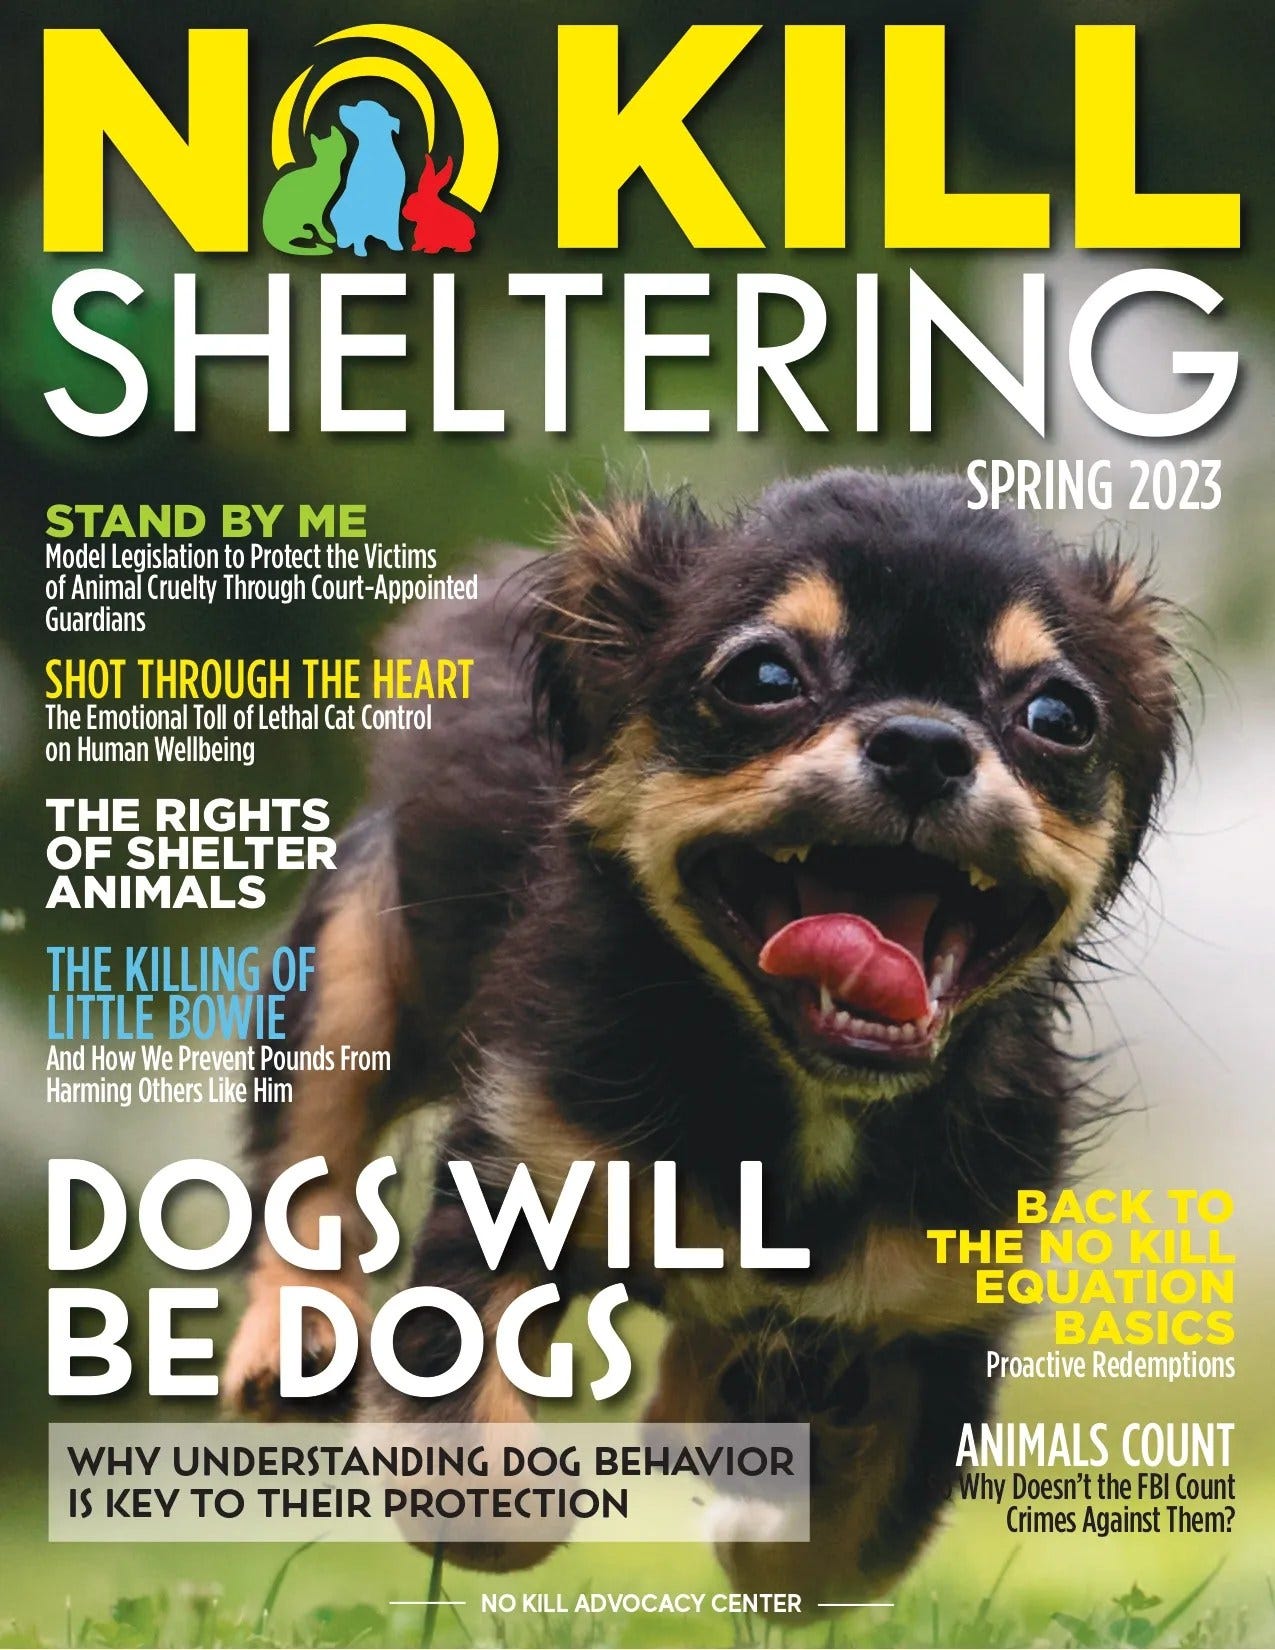 May be an image of dog and text that says 'NO KILL SHELTERING STAND BY ME SPRING 2023 Model Legislation Protect Victims Animal Cruelty Through Court-Appointed Guardians SHOT THROUGH THE HEART The Emotional Toll ofLethl Cat Control on Human Wellbeing THE RIGHTS OF SHELTER ANIMALS THE KILLING OF LITTLE BOWIE And How Prevent Pounds From Harming Others Like Him DOGS WILL BE DOGS WHY UNDERSTANDING DOG BEHAVIOR IS KEY TO THEIR PROTECTION BACK TO THE NO KILL EQUATION BASICS Proactive Redemptions ANIMALS COUNT Why Doesn't the FBI Count Crimes Against Them? NO KILL ADVOCACY CENTER'